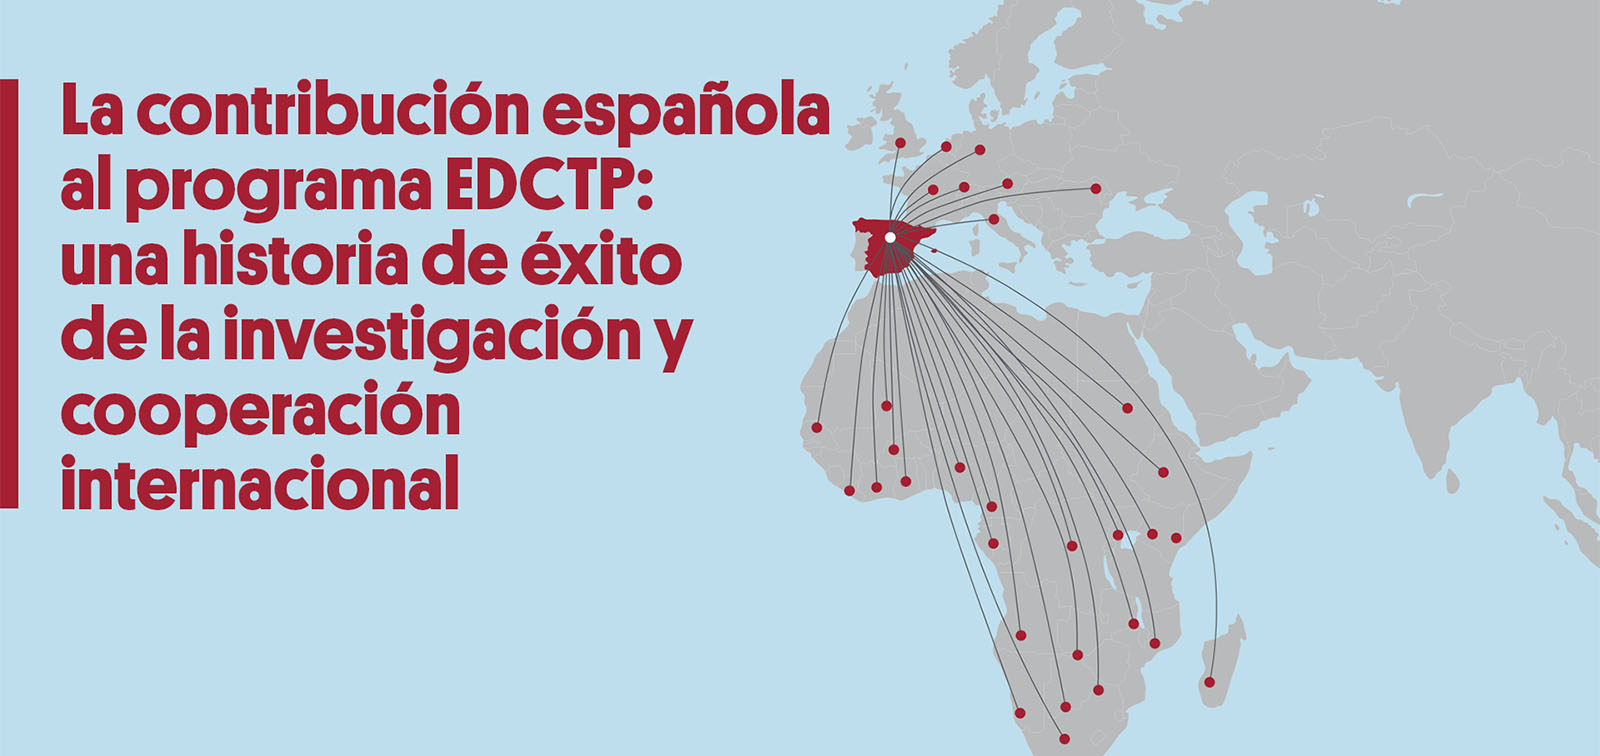 Spanish contribution to EDCTP programme